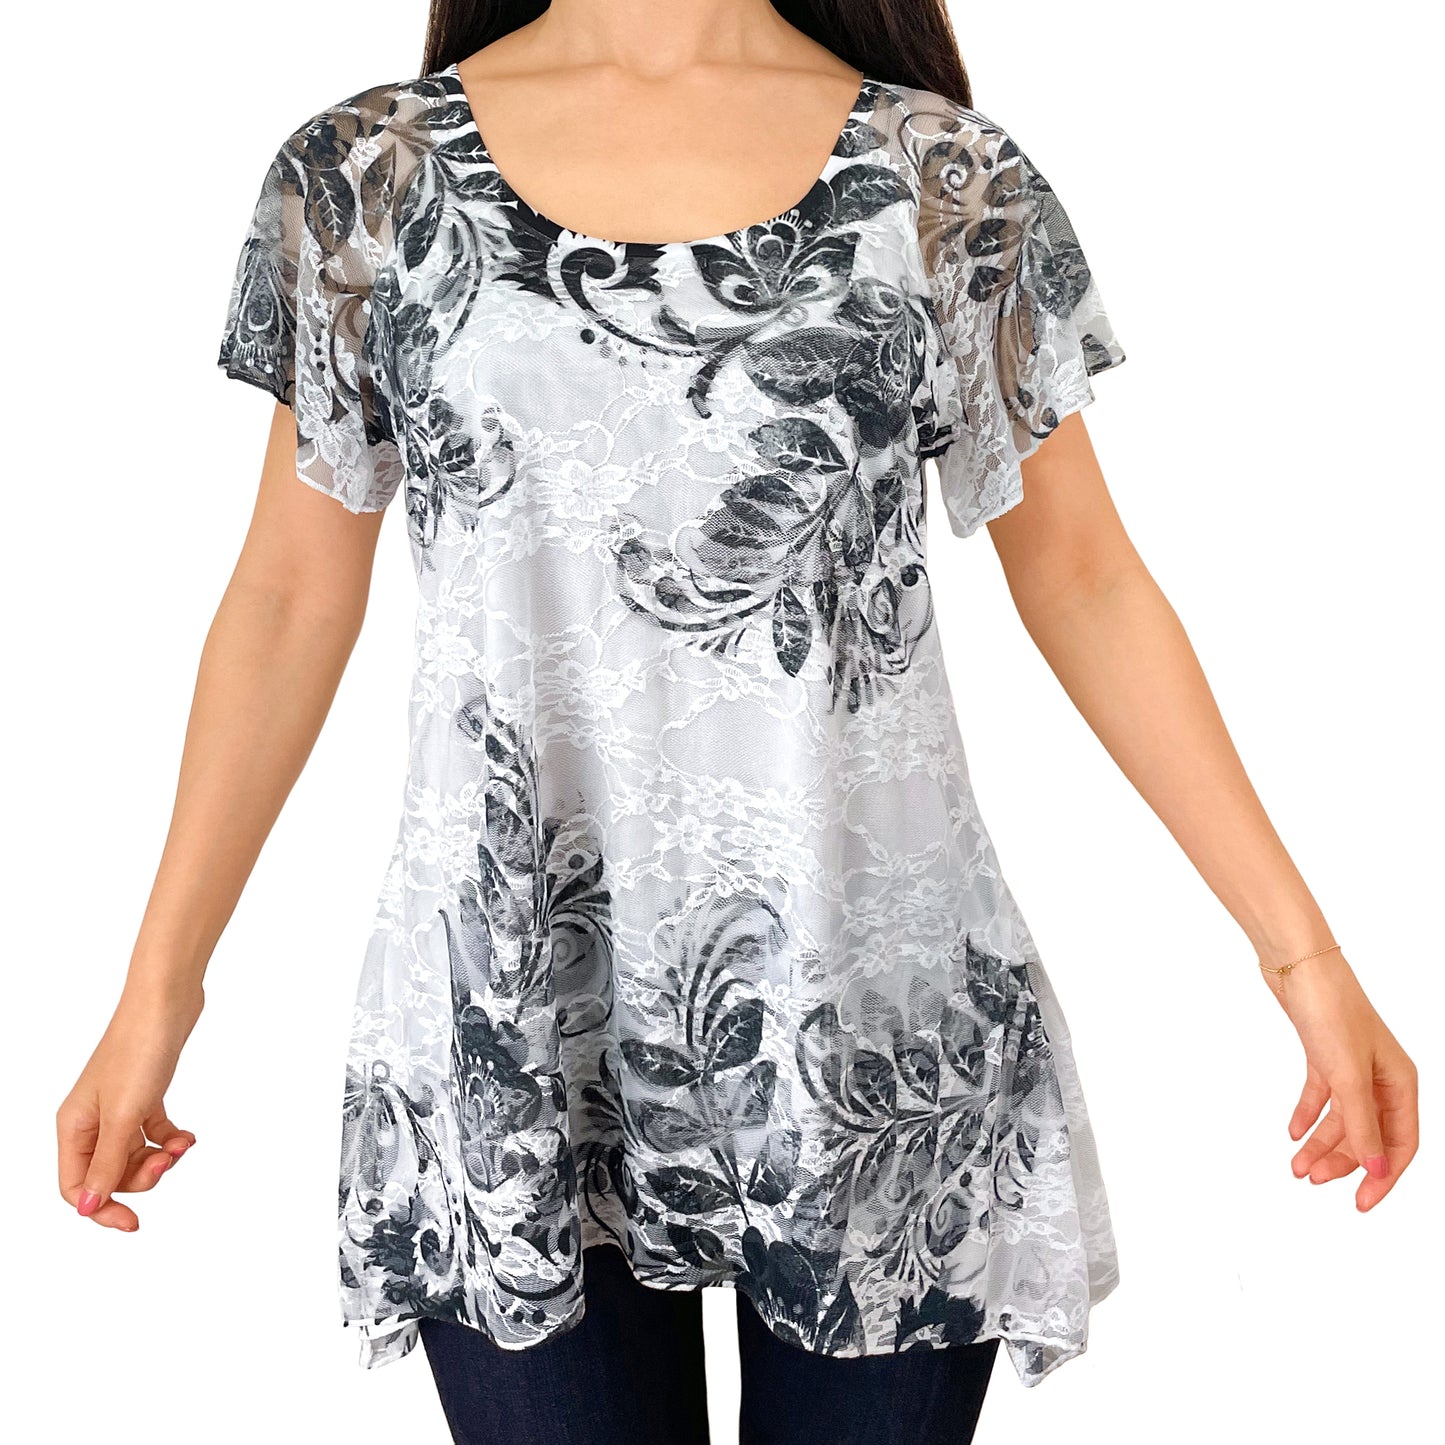 Black Graphic Floral Print Lace Tunic Top